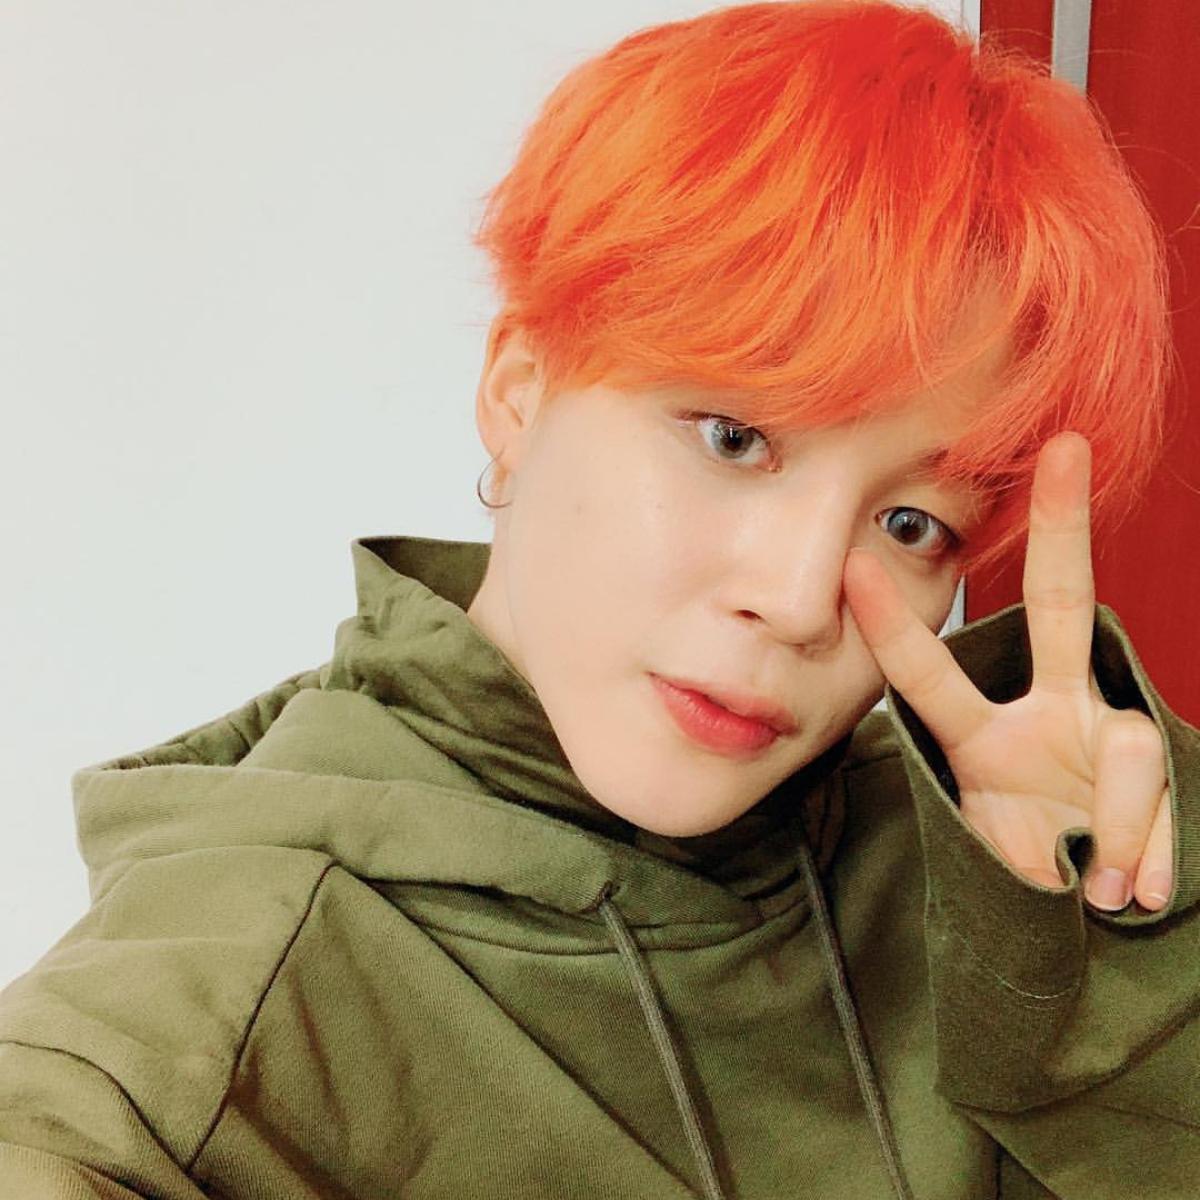 What is Jimin from BTS's hairstyle? - Quora